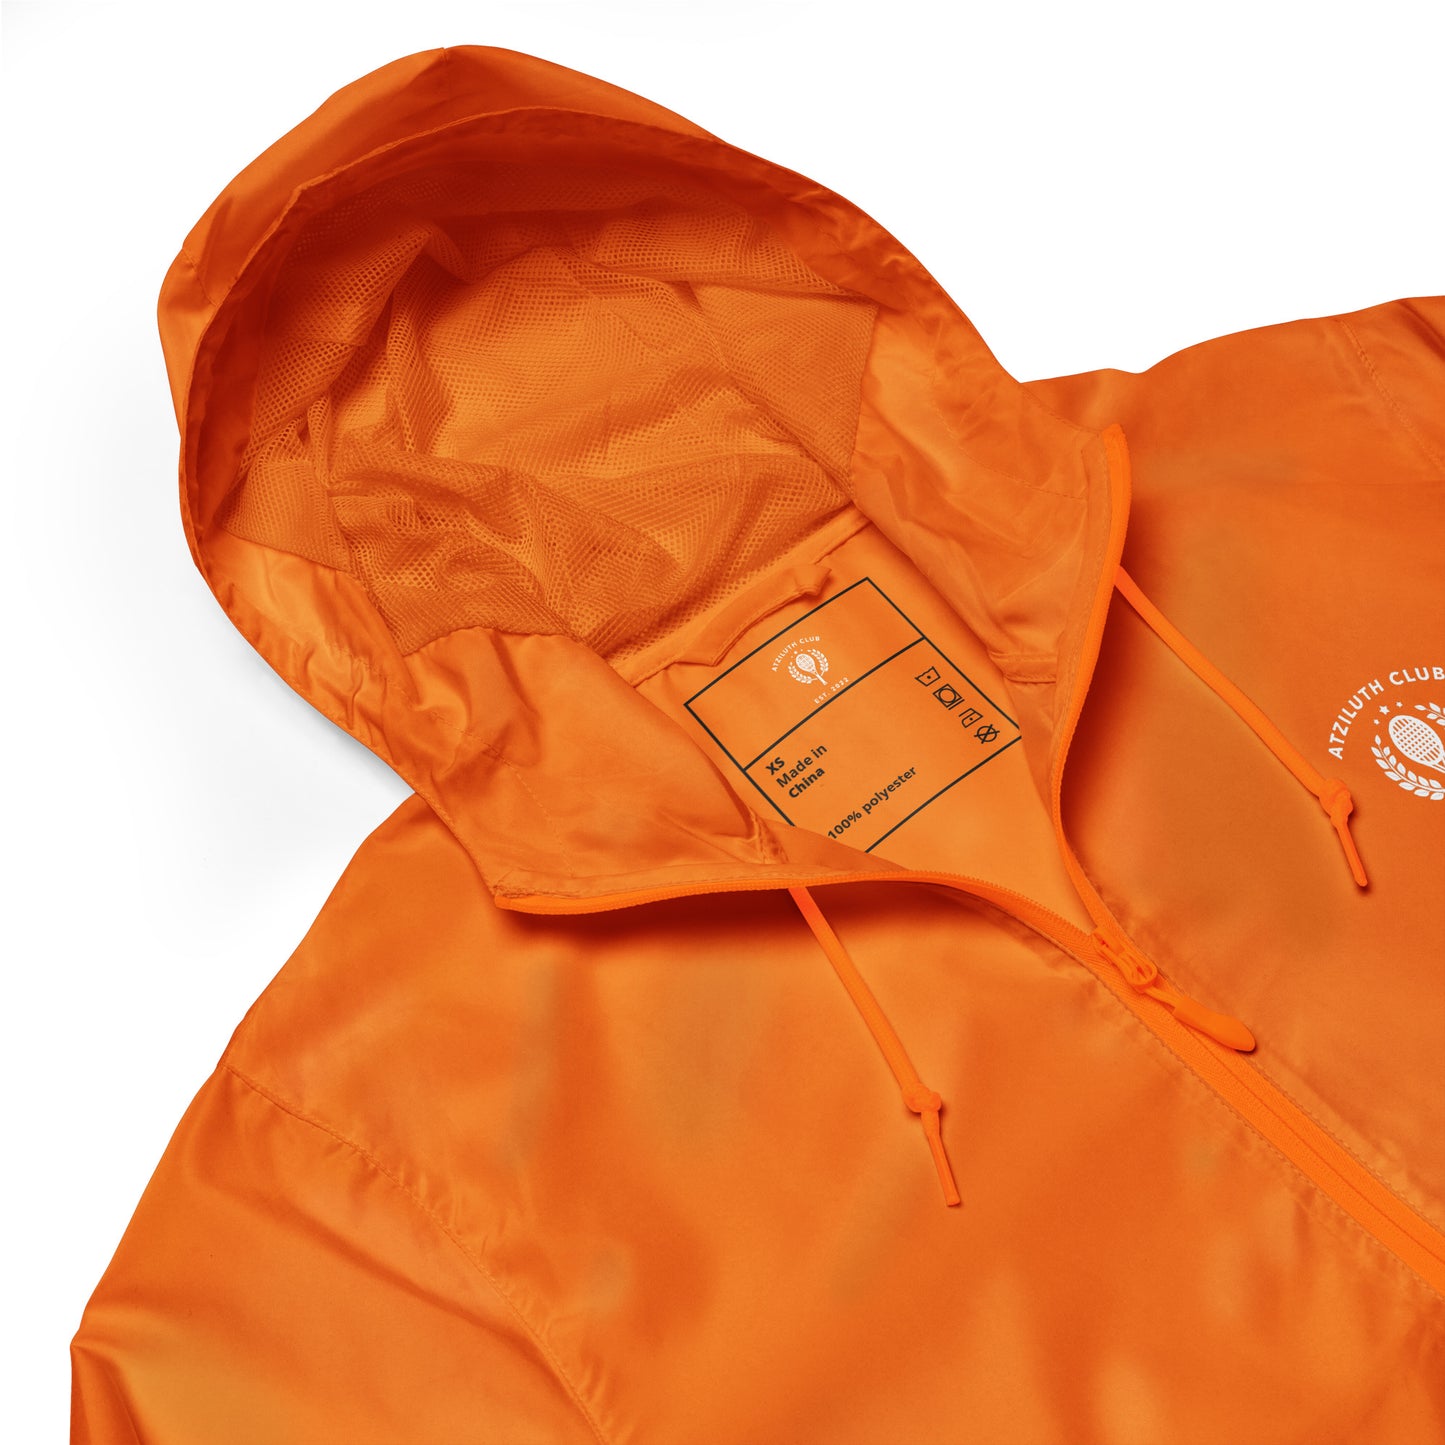 Atziluth Gallery "Country Club" zip up windbreaker